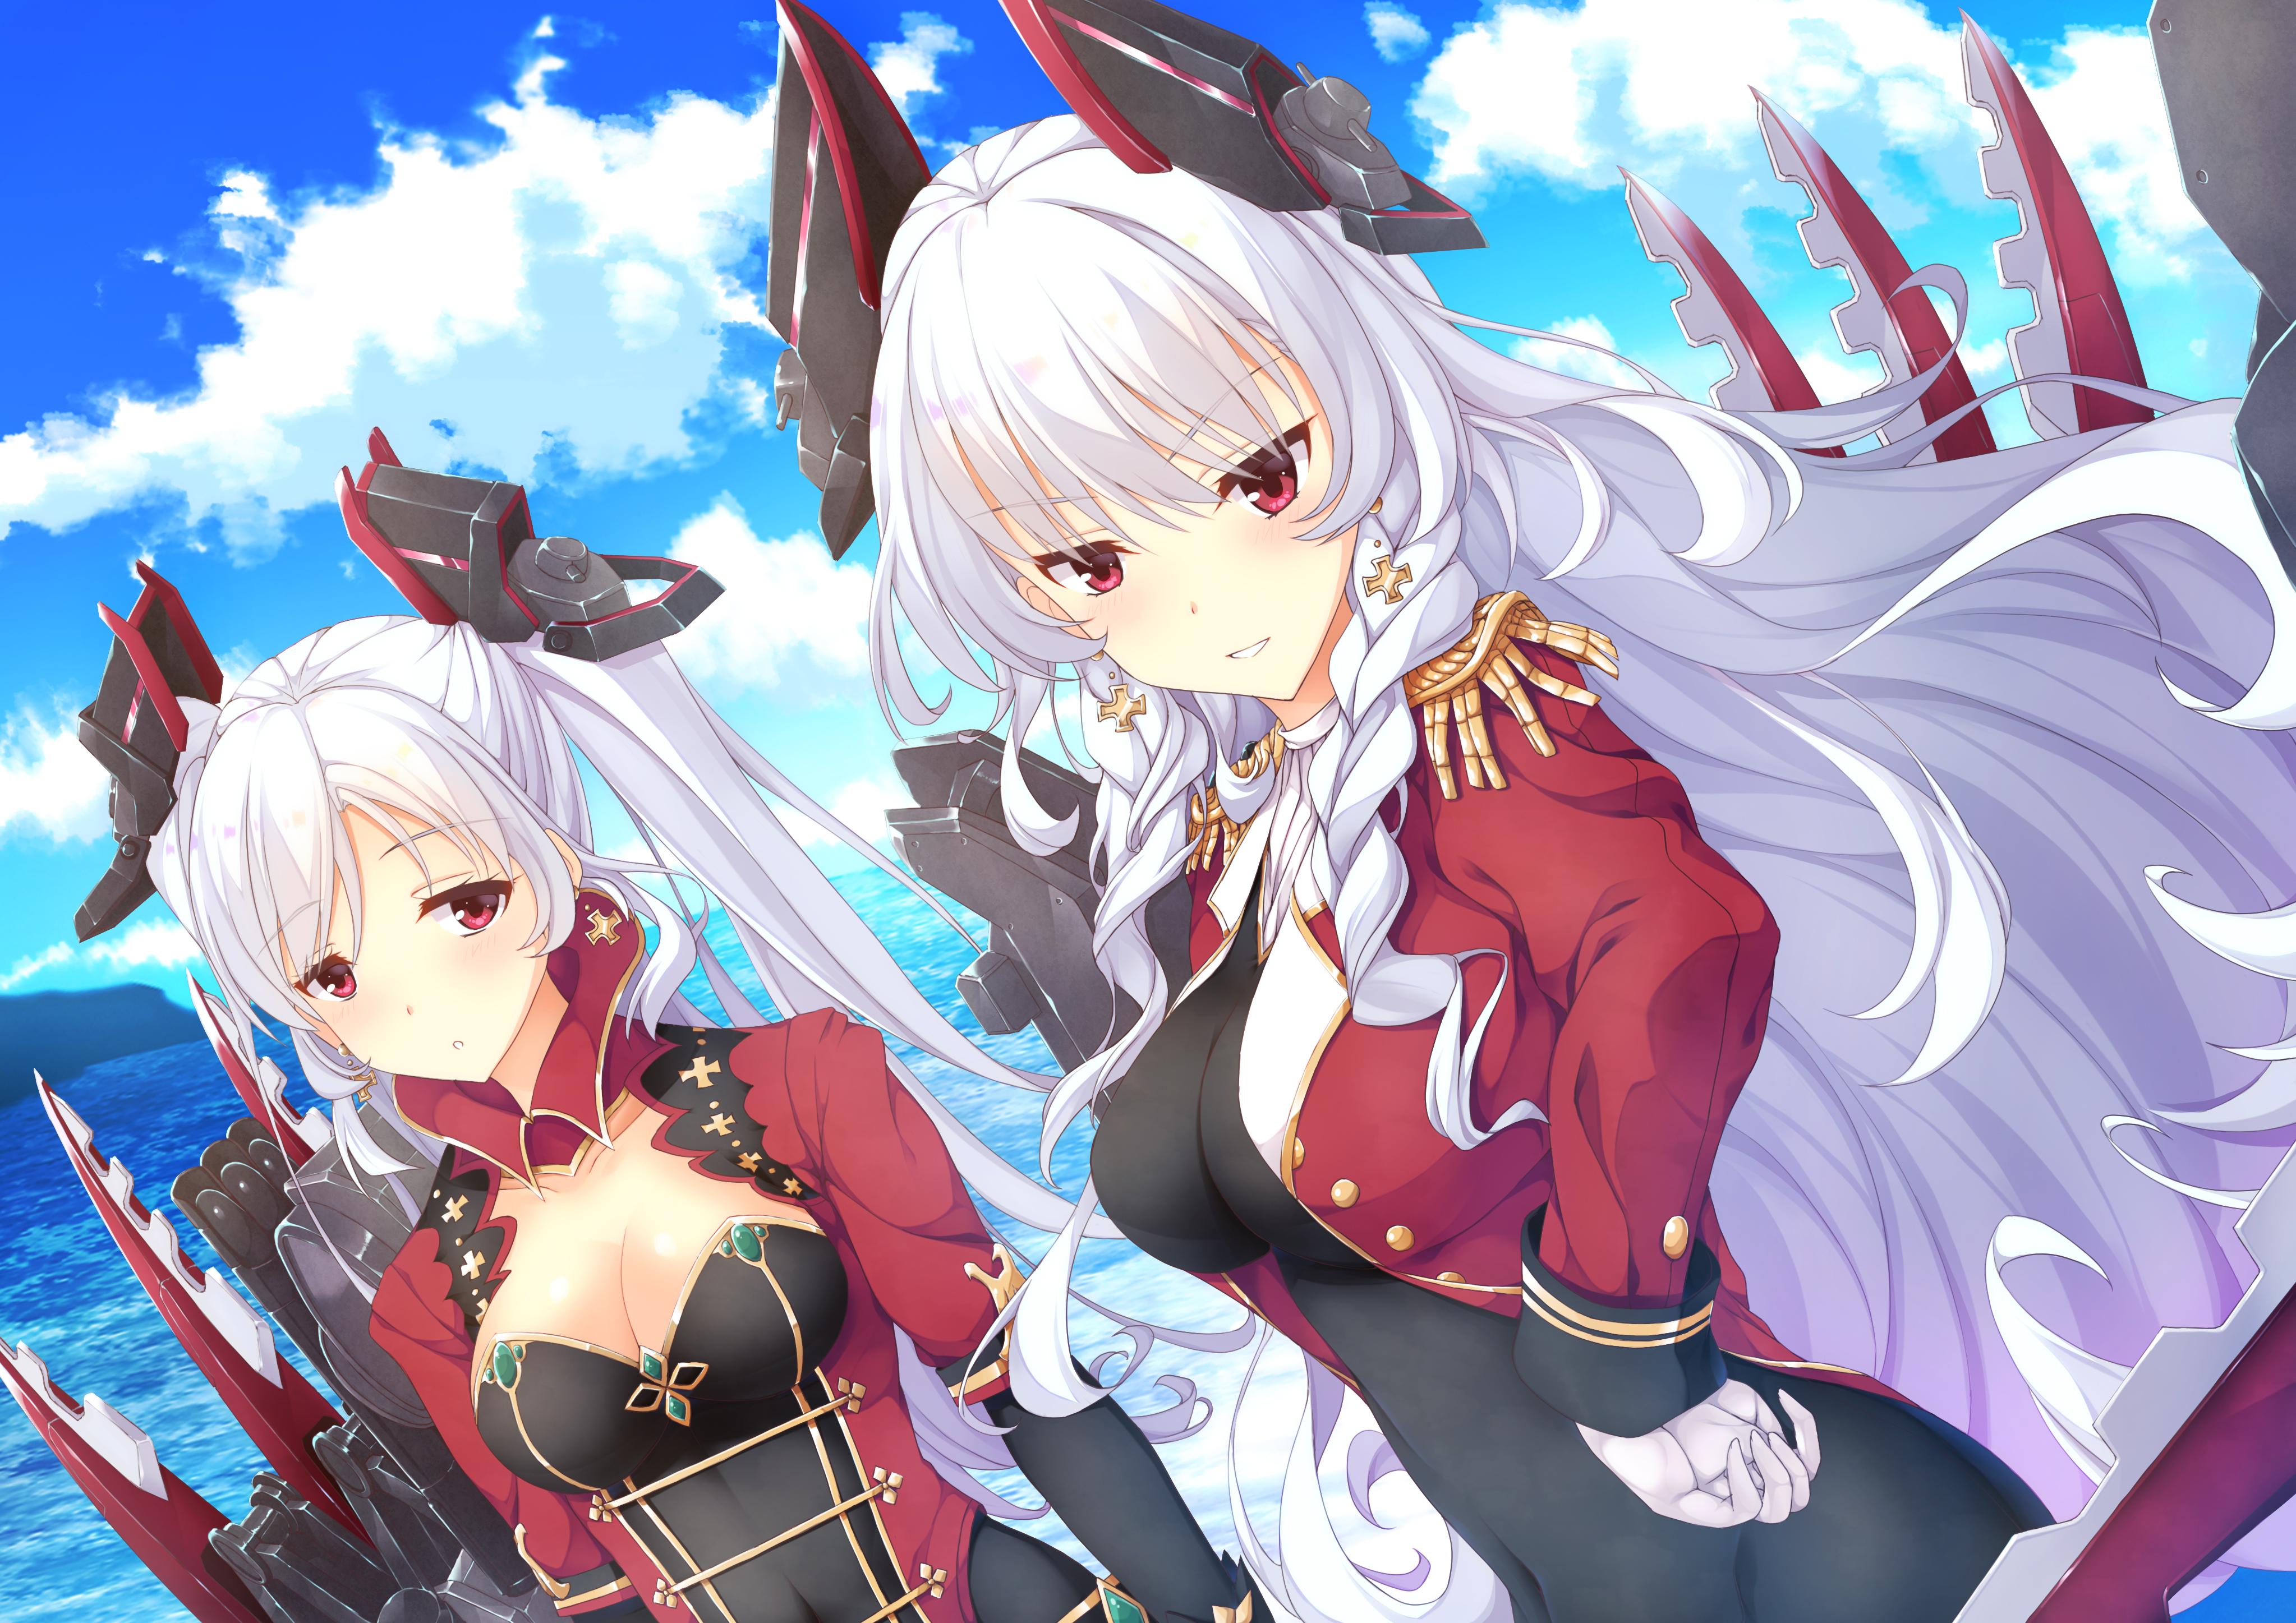 Anime 4093x2894 Blue Oath Scharnhorst (Blue Oath) Gneisenau (Blue Oath) Gold-trimmed clothes hair accessories red eyes white hair Rigging long hair anime girls military uniform stylized military uniform Golden Iron cross epaulettes hair in face two women sky looking at viewer pale detailed details high detail Caucasian